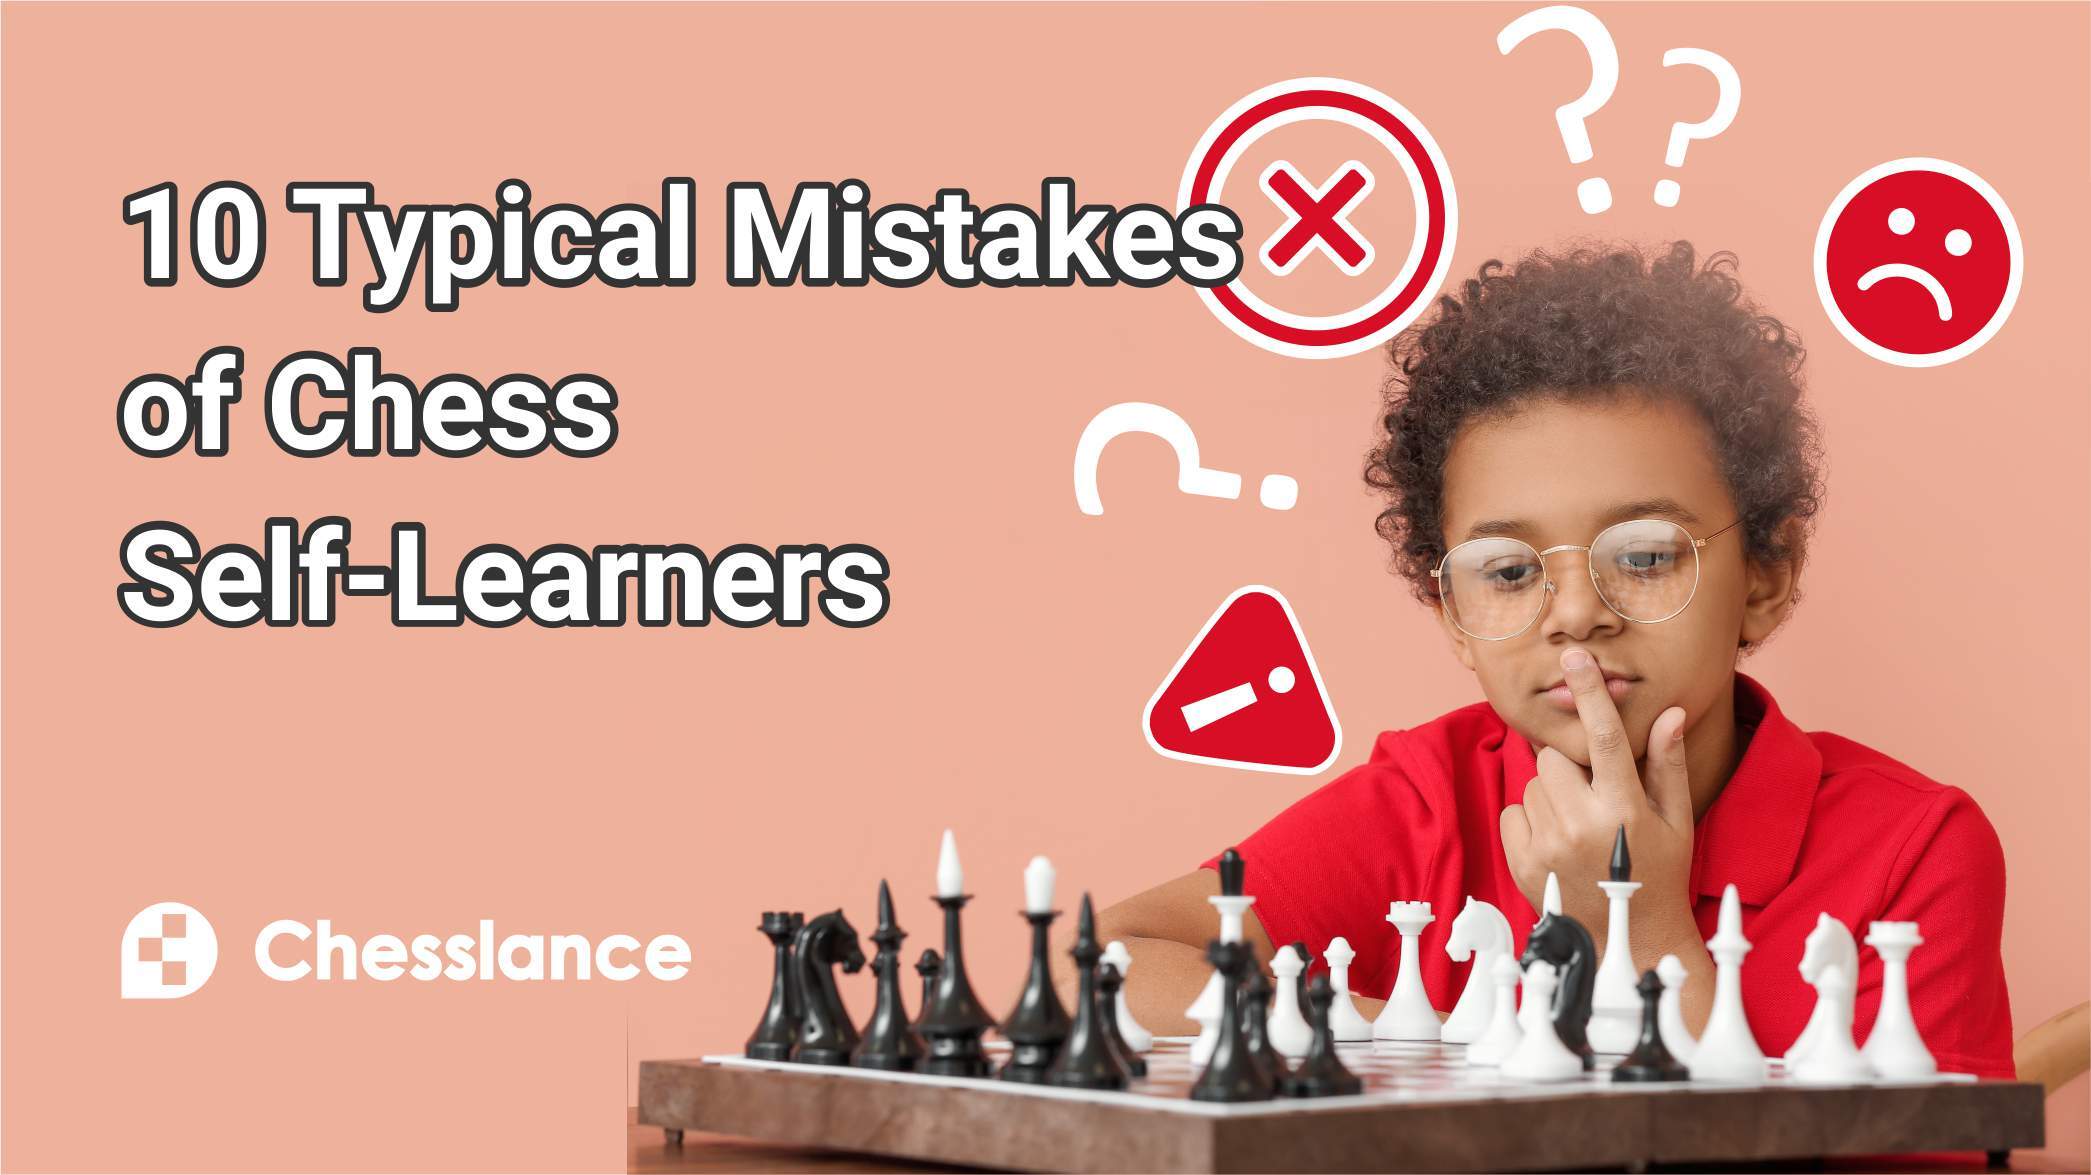 10 Typical Mistakes of Chess Self-Learners